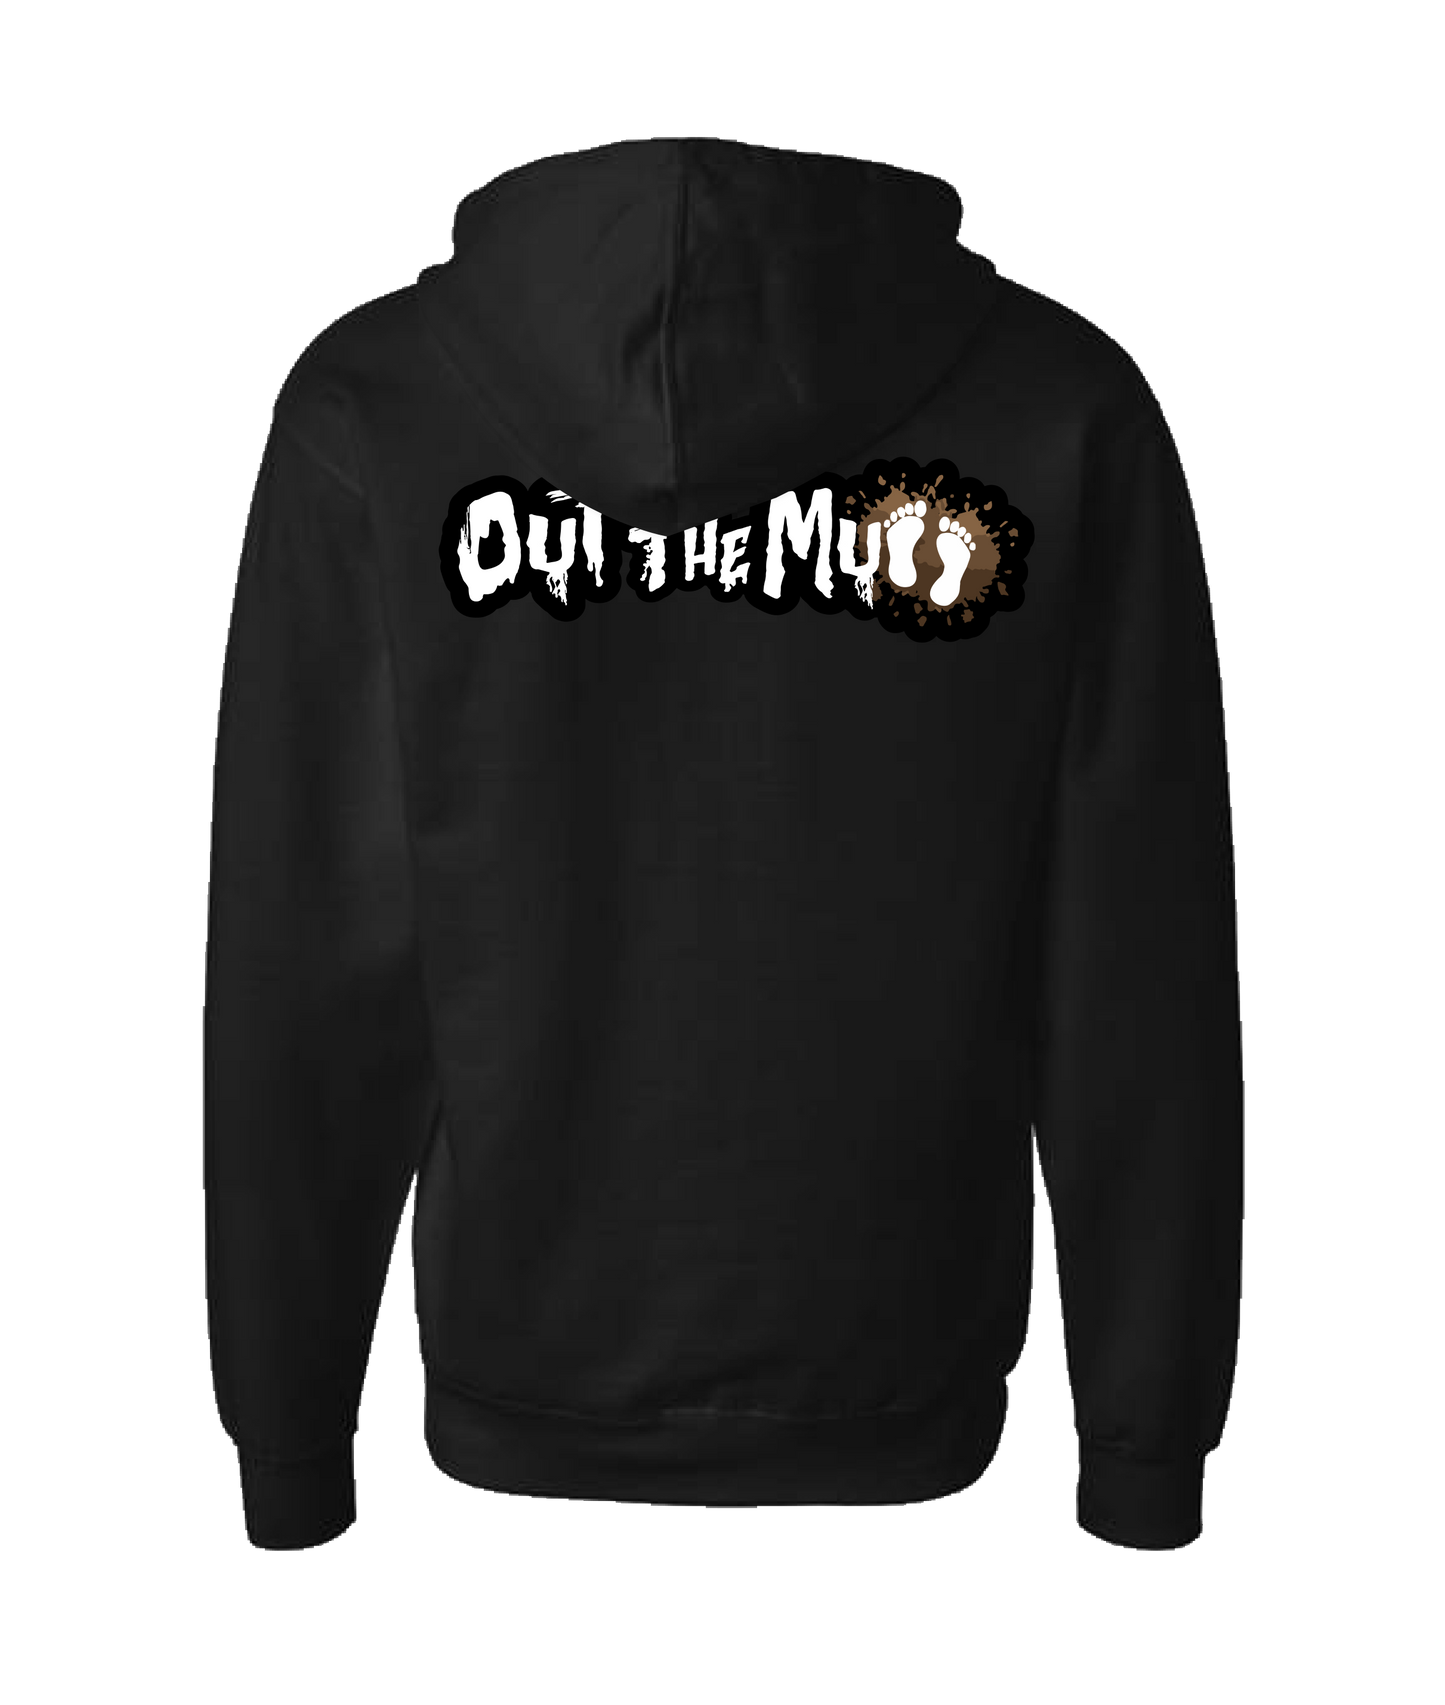 04 APPROVED
 - OUT THE MUD - Black Zip Up Hoodie